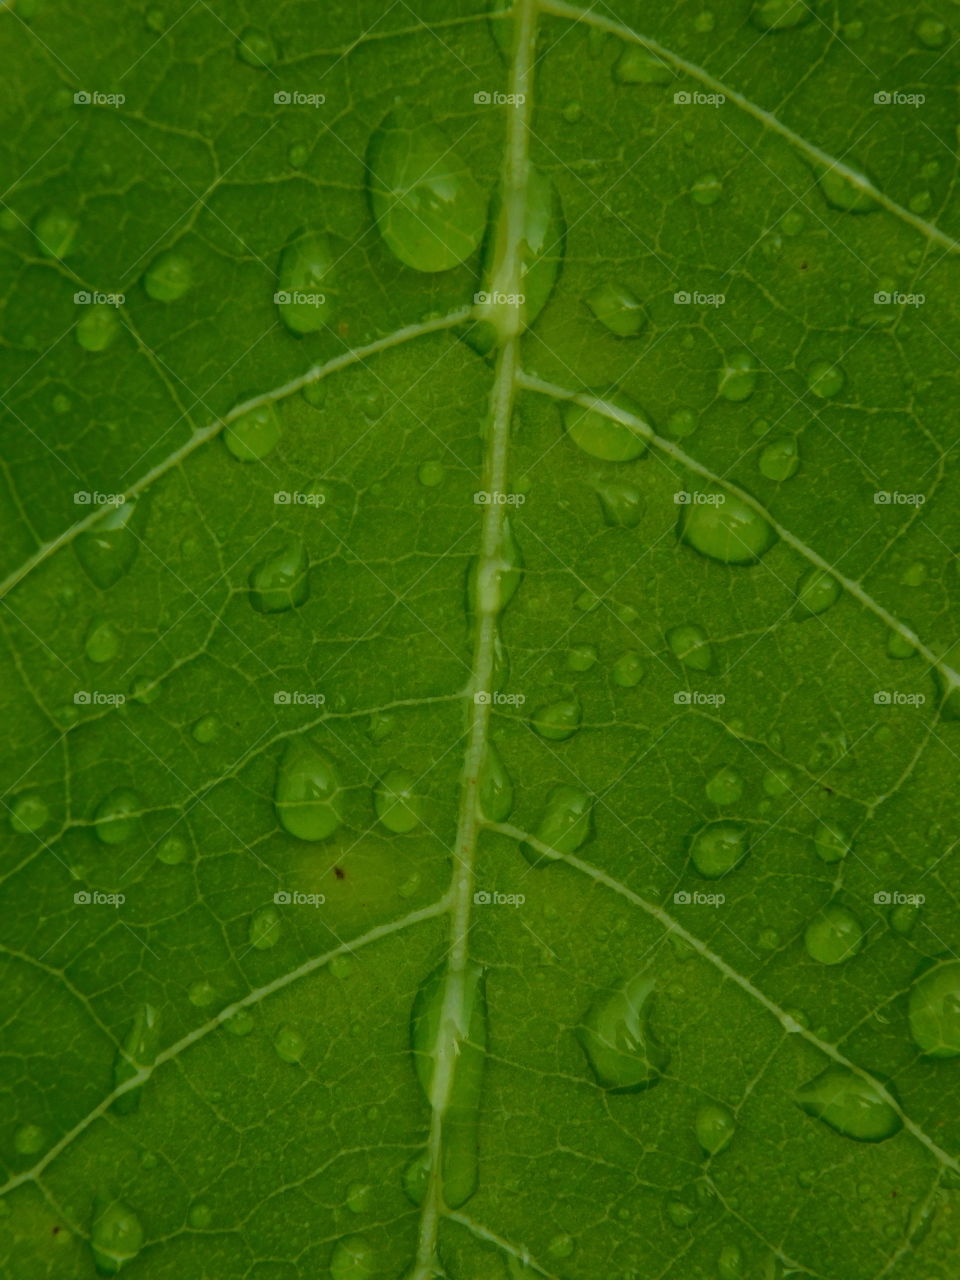 Detailed structure of Leaf with small water droplets.